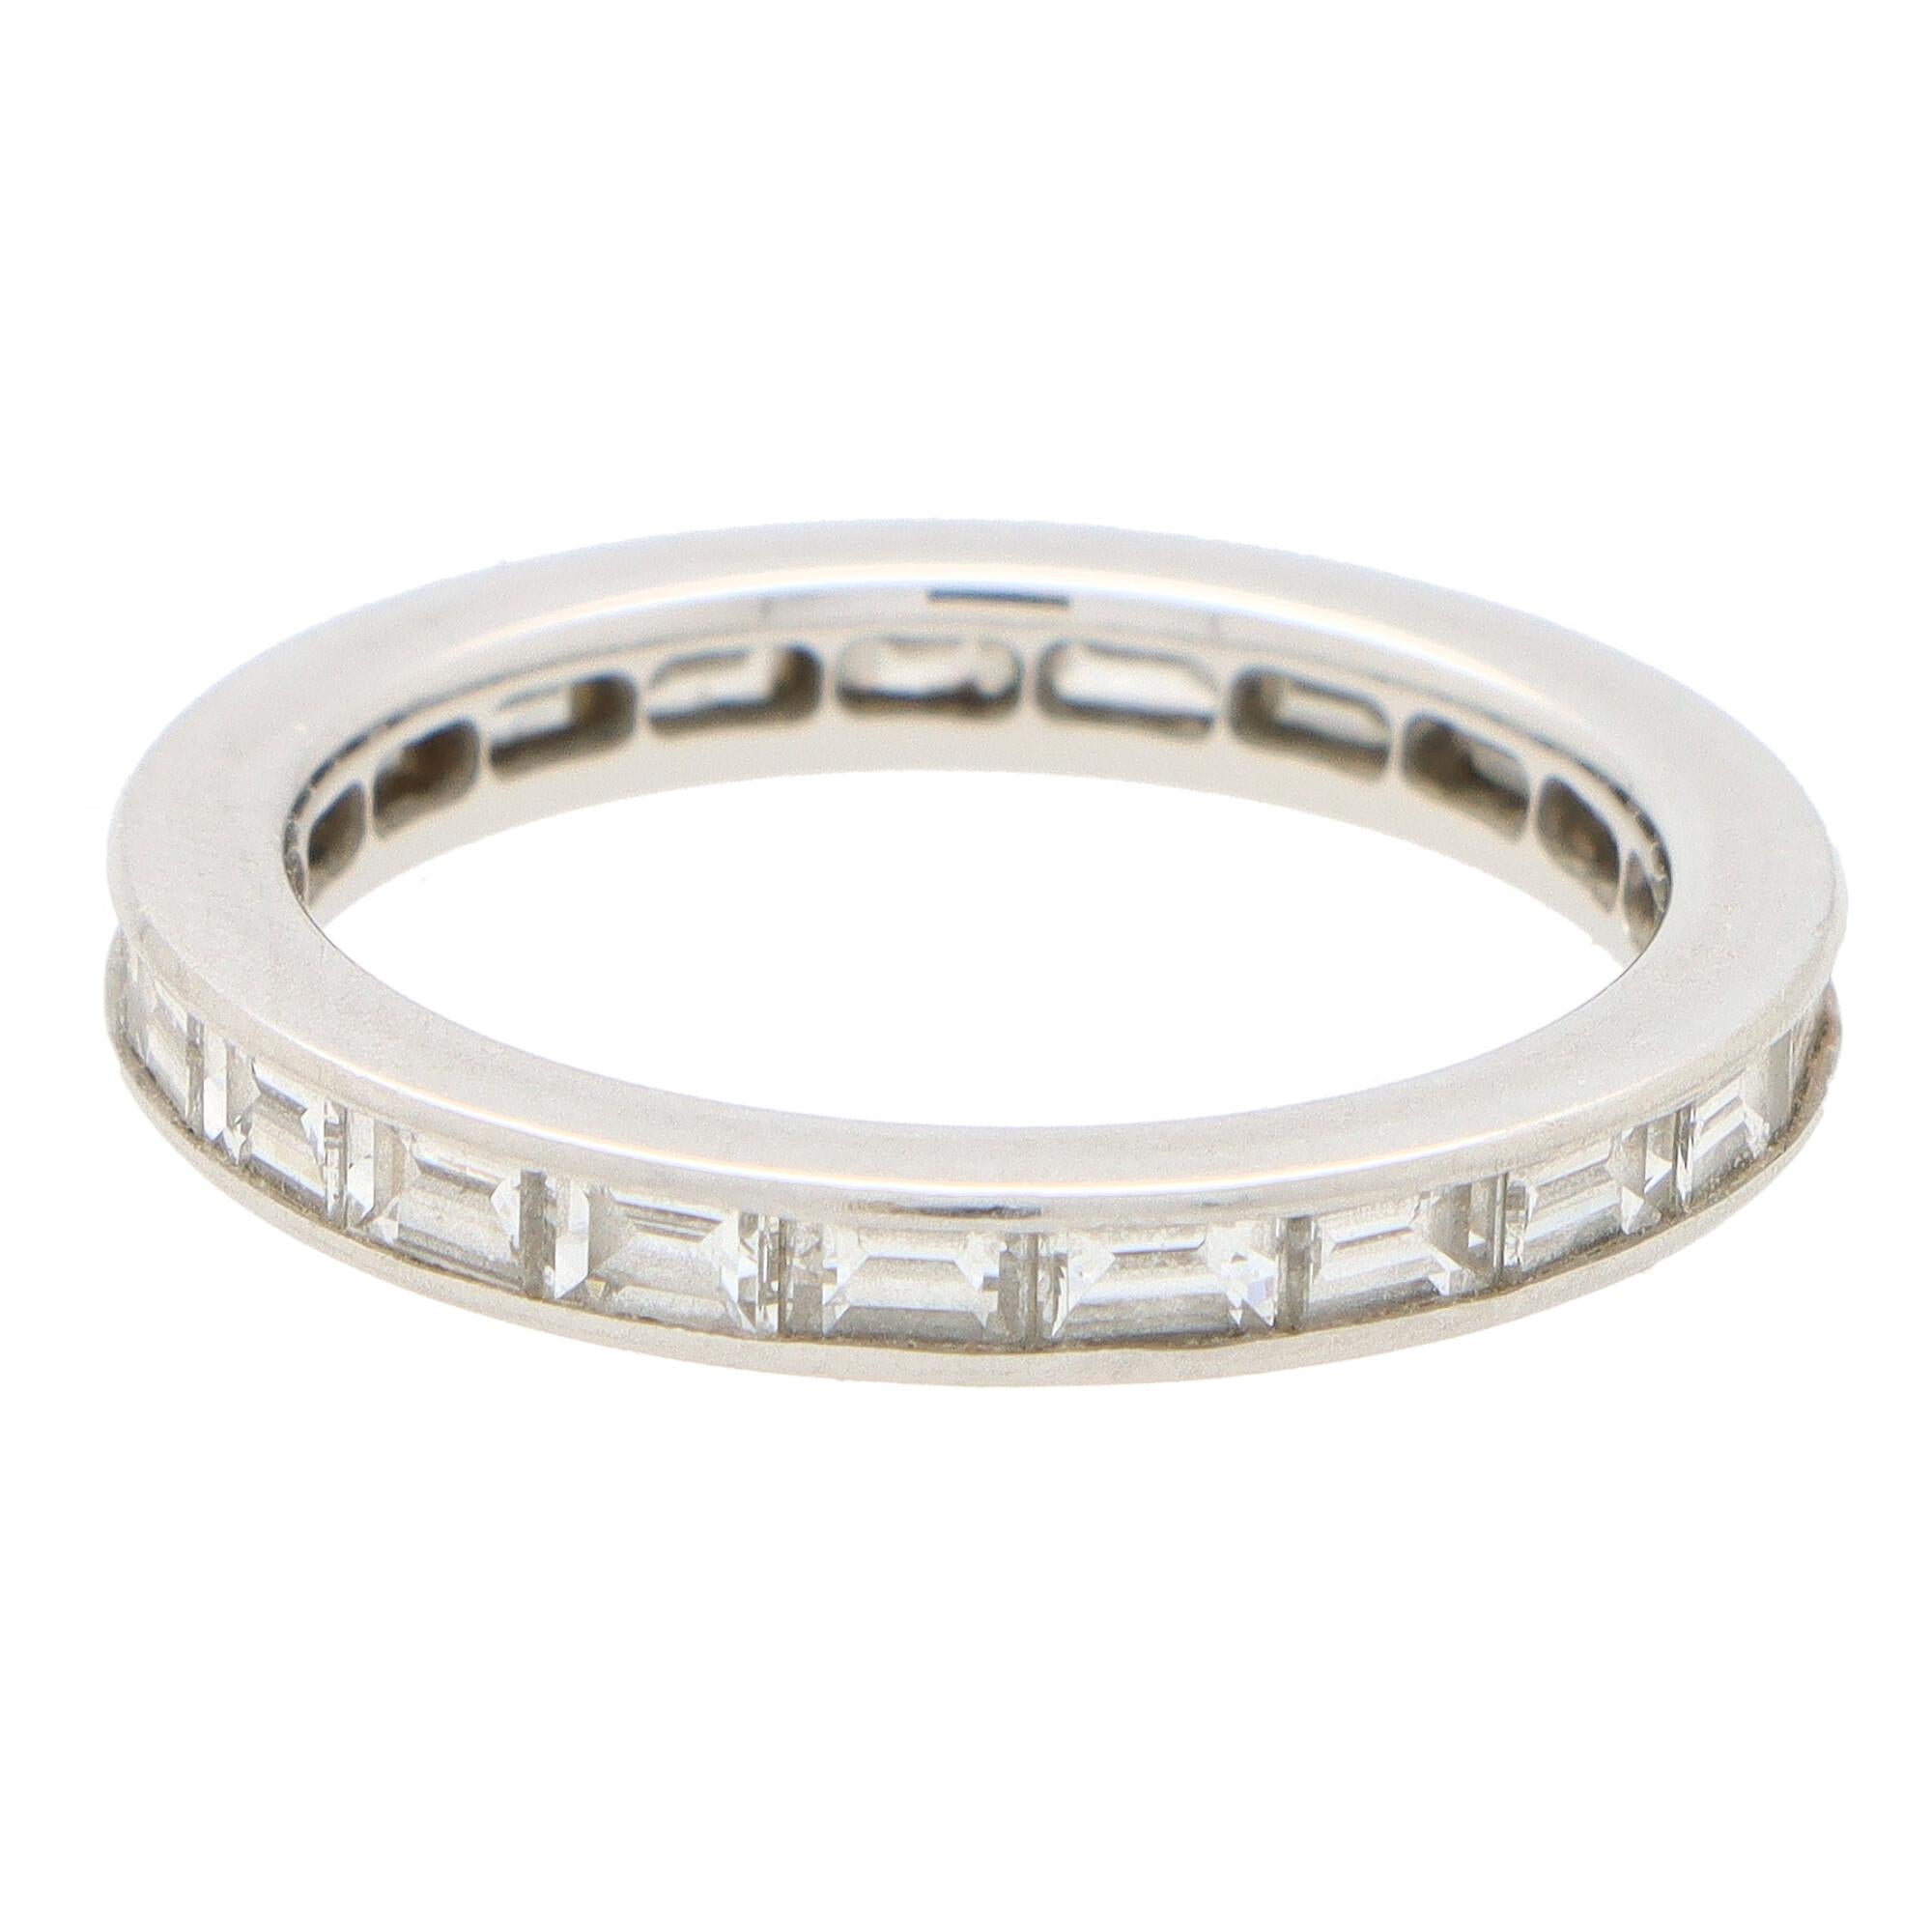  A lovely vintage Fred Paris baguette cut diamond full eternity ring set in platinum, signed Fred Paris.

The eternity ring is set with exactly 21 round baguette cut diamonds; all of which are bezel set within a 2.5-millimetre band (there is a